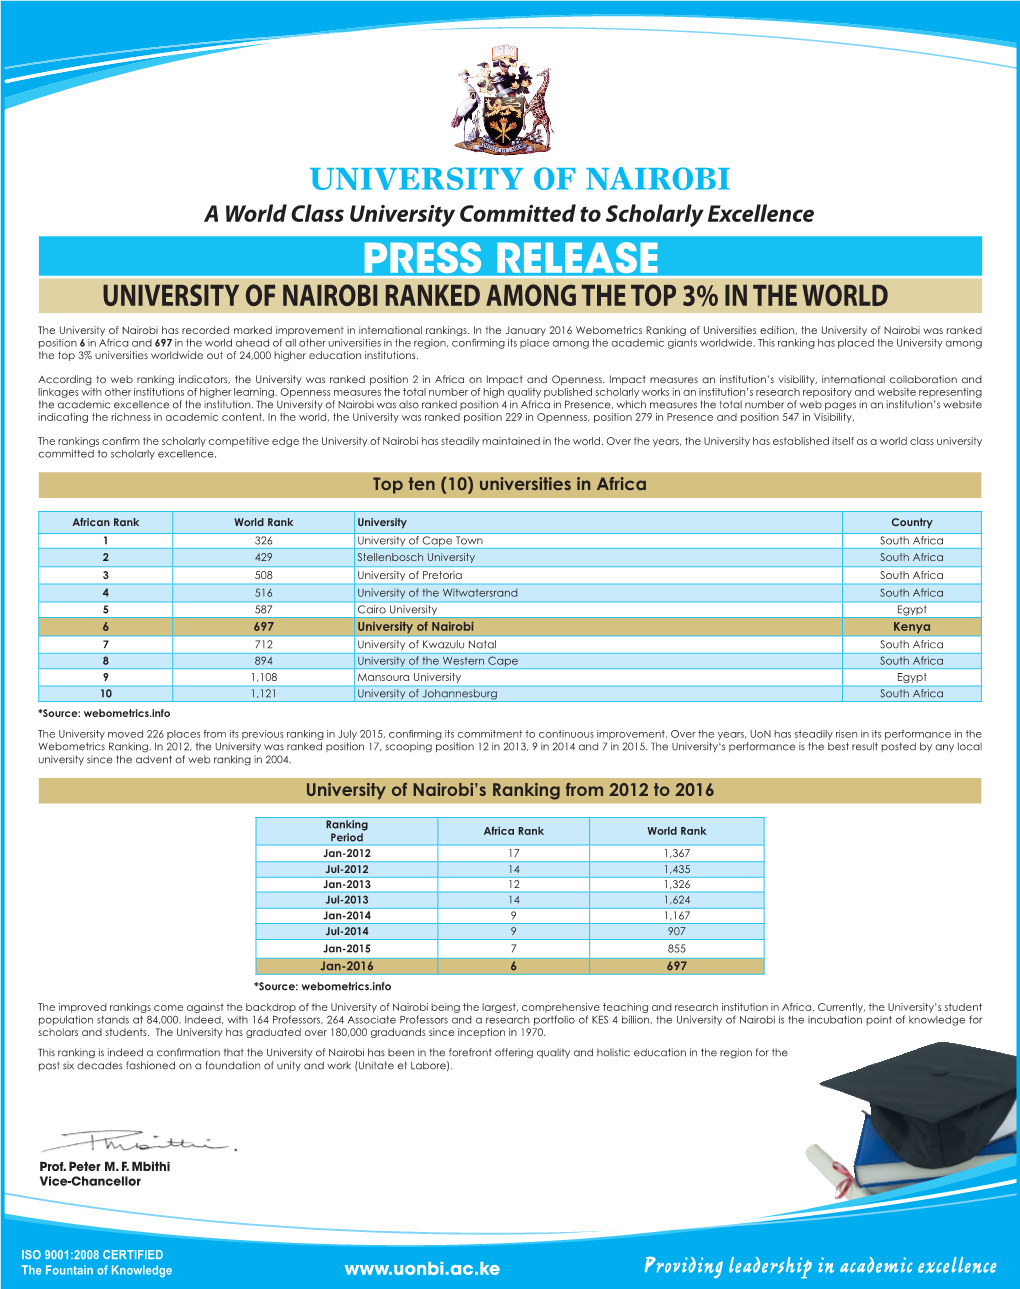 University of Nairobi Ranked Among the Top 3% in the World